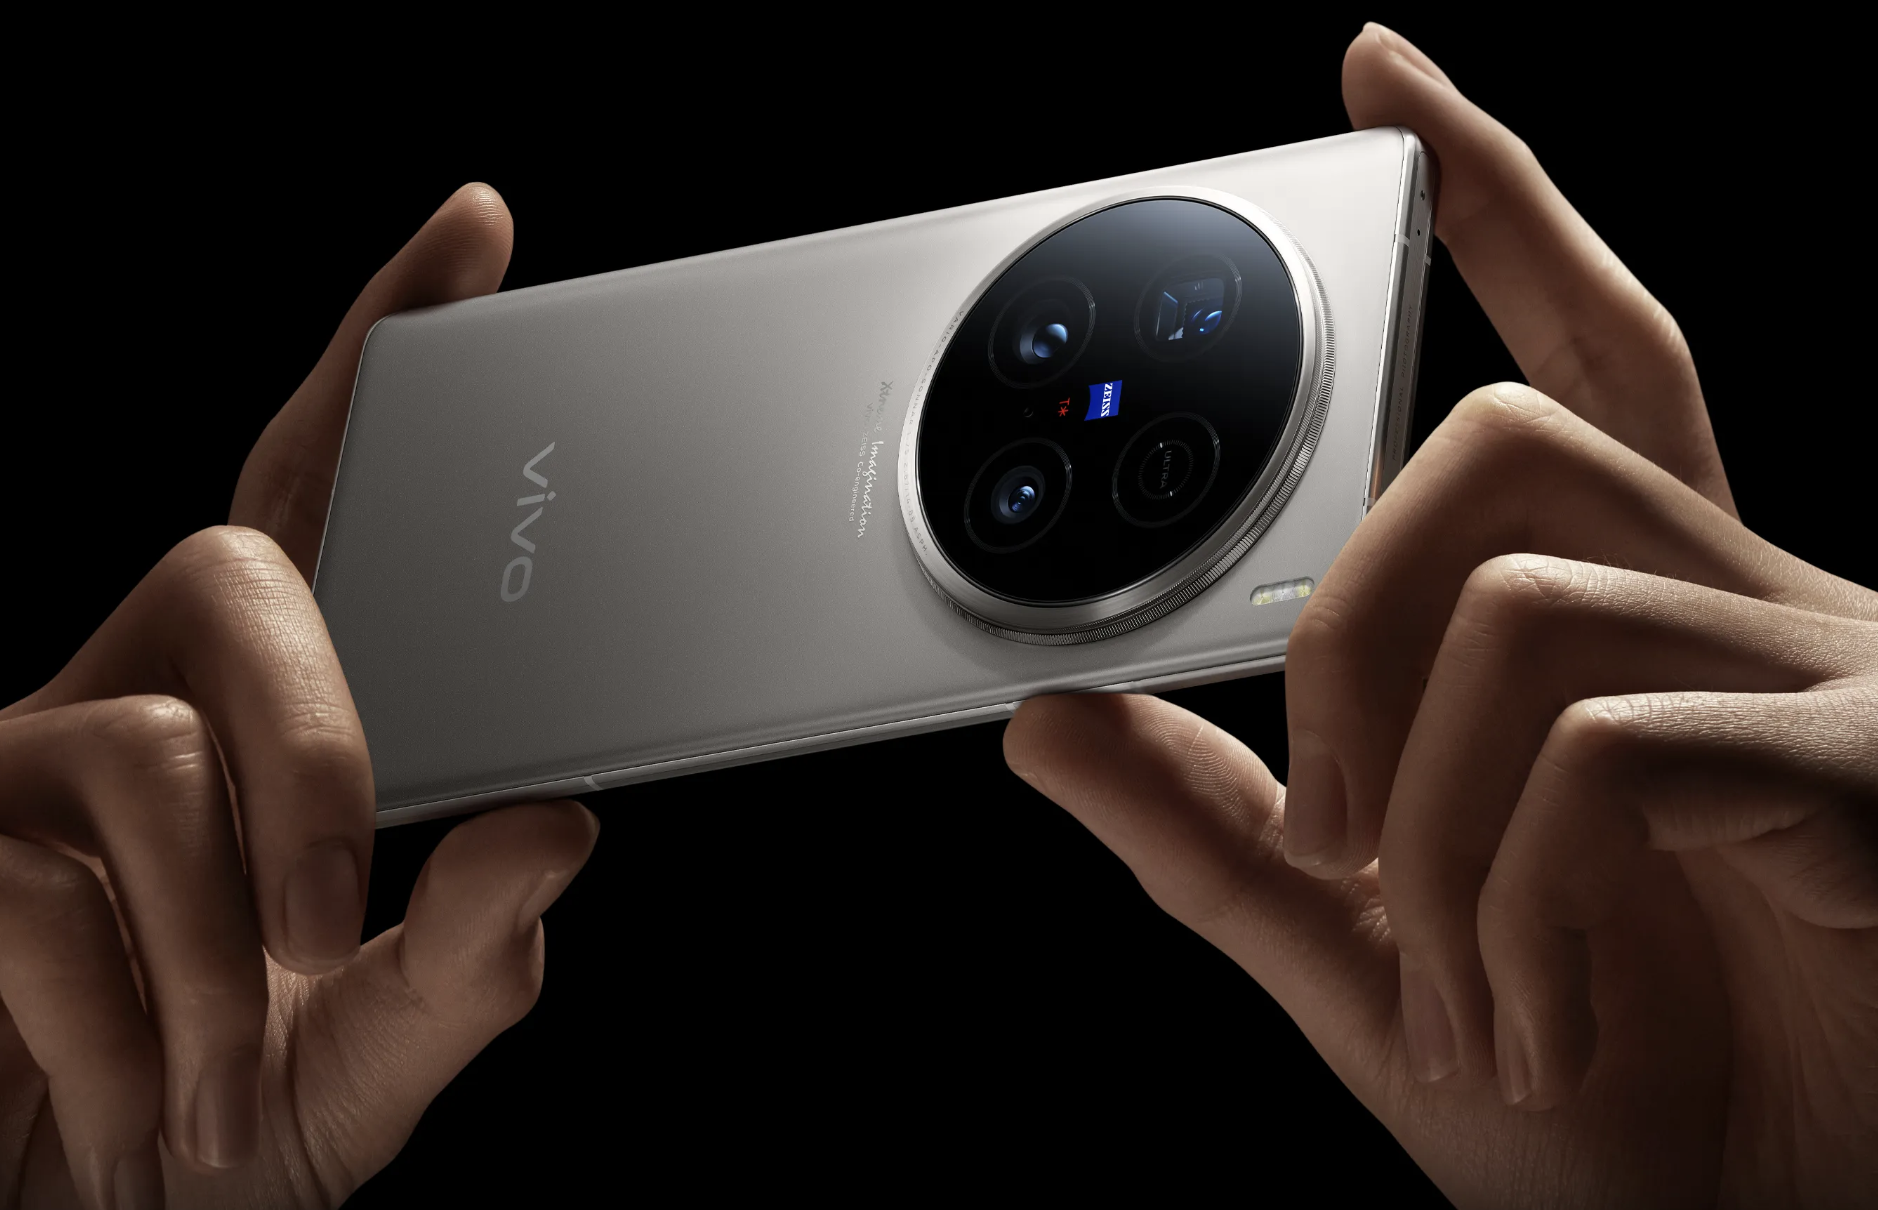 The Vivo X100 wants to Claim the Smartphone Photography Throne